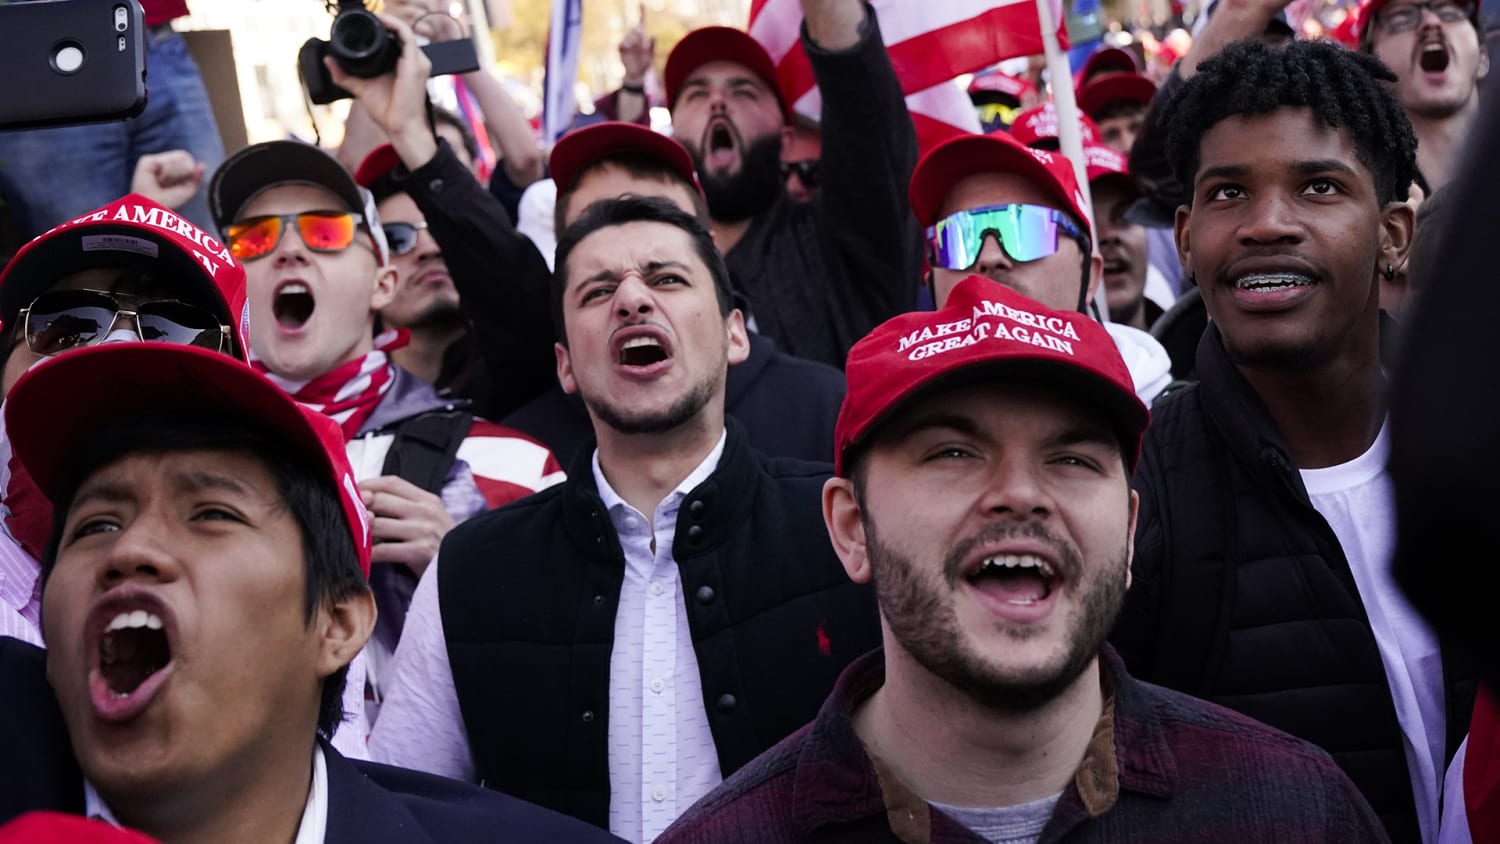 A photoshows a crowd of unmasked Trump supporters shouting